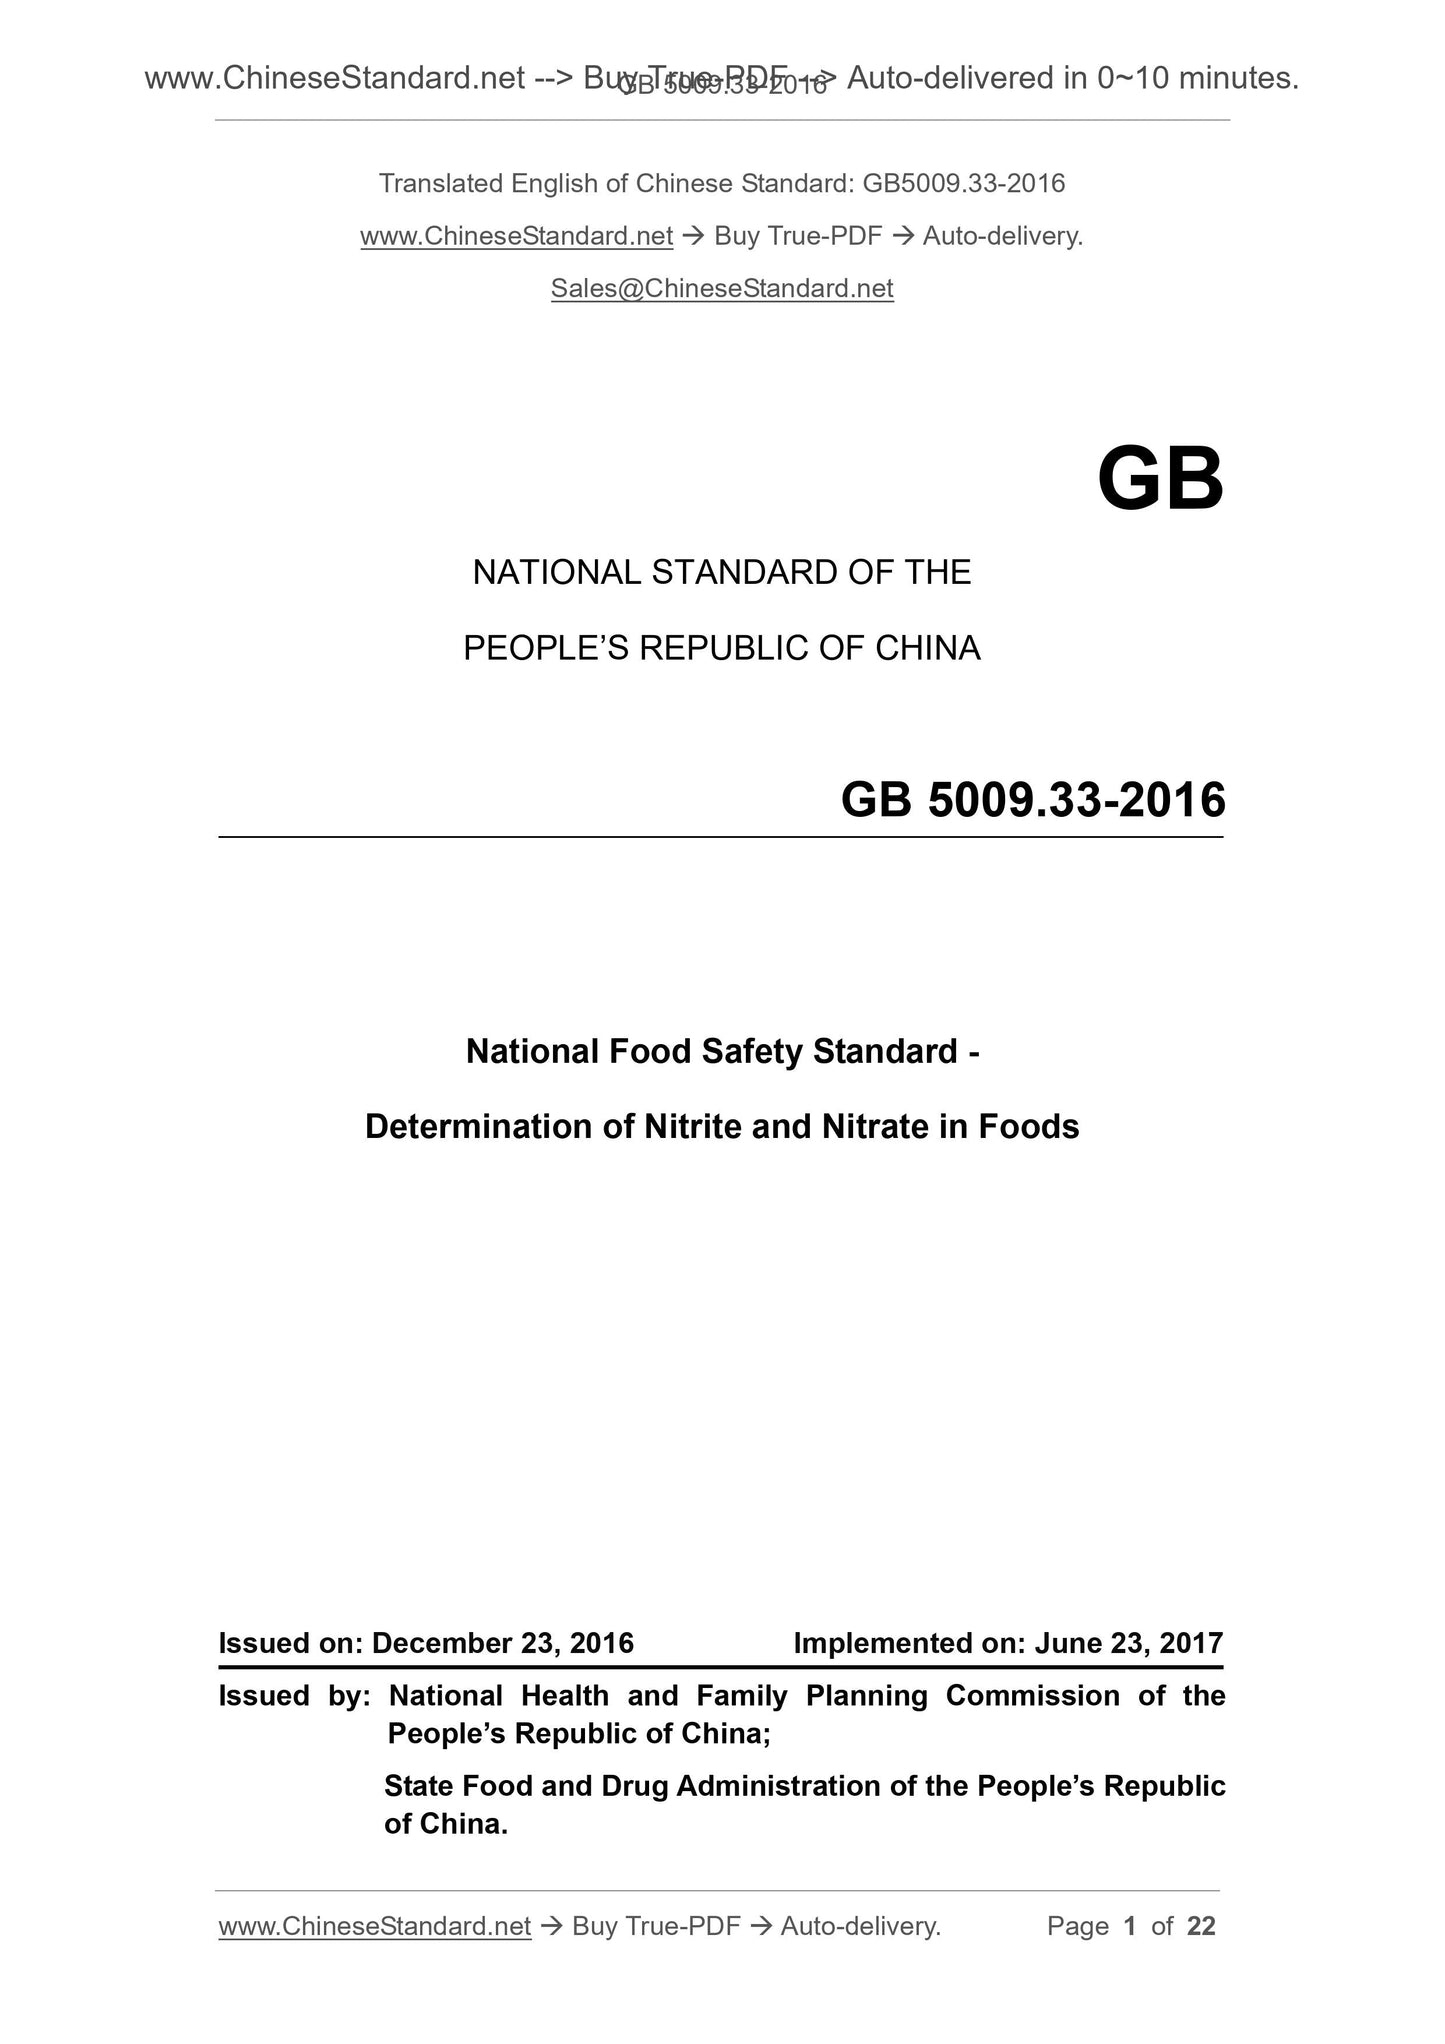 GB 5009.33-2016 Page 1